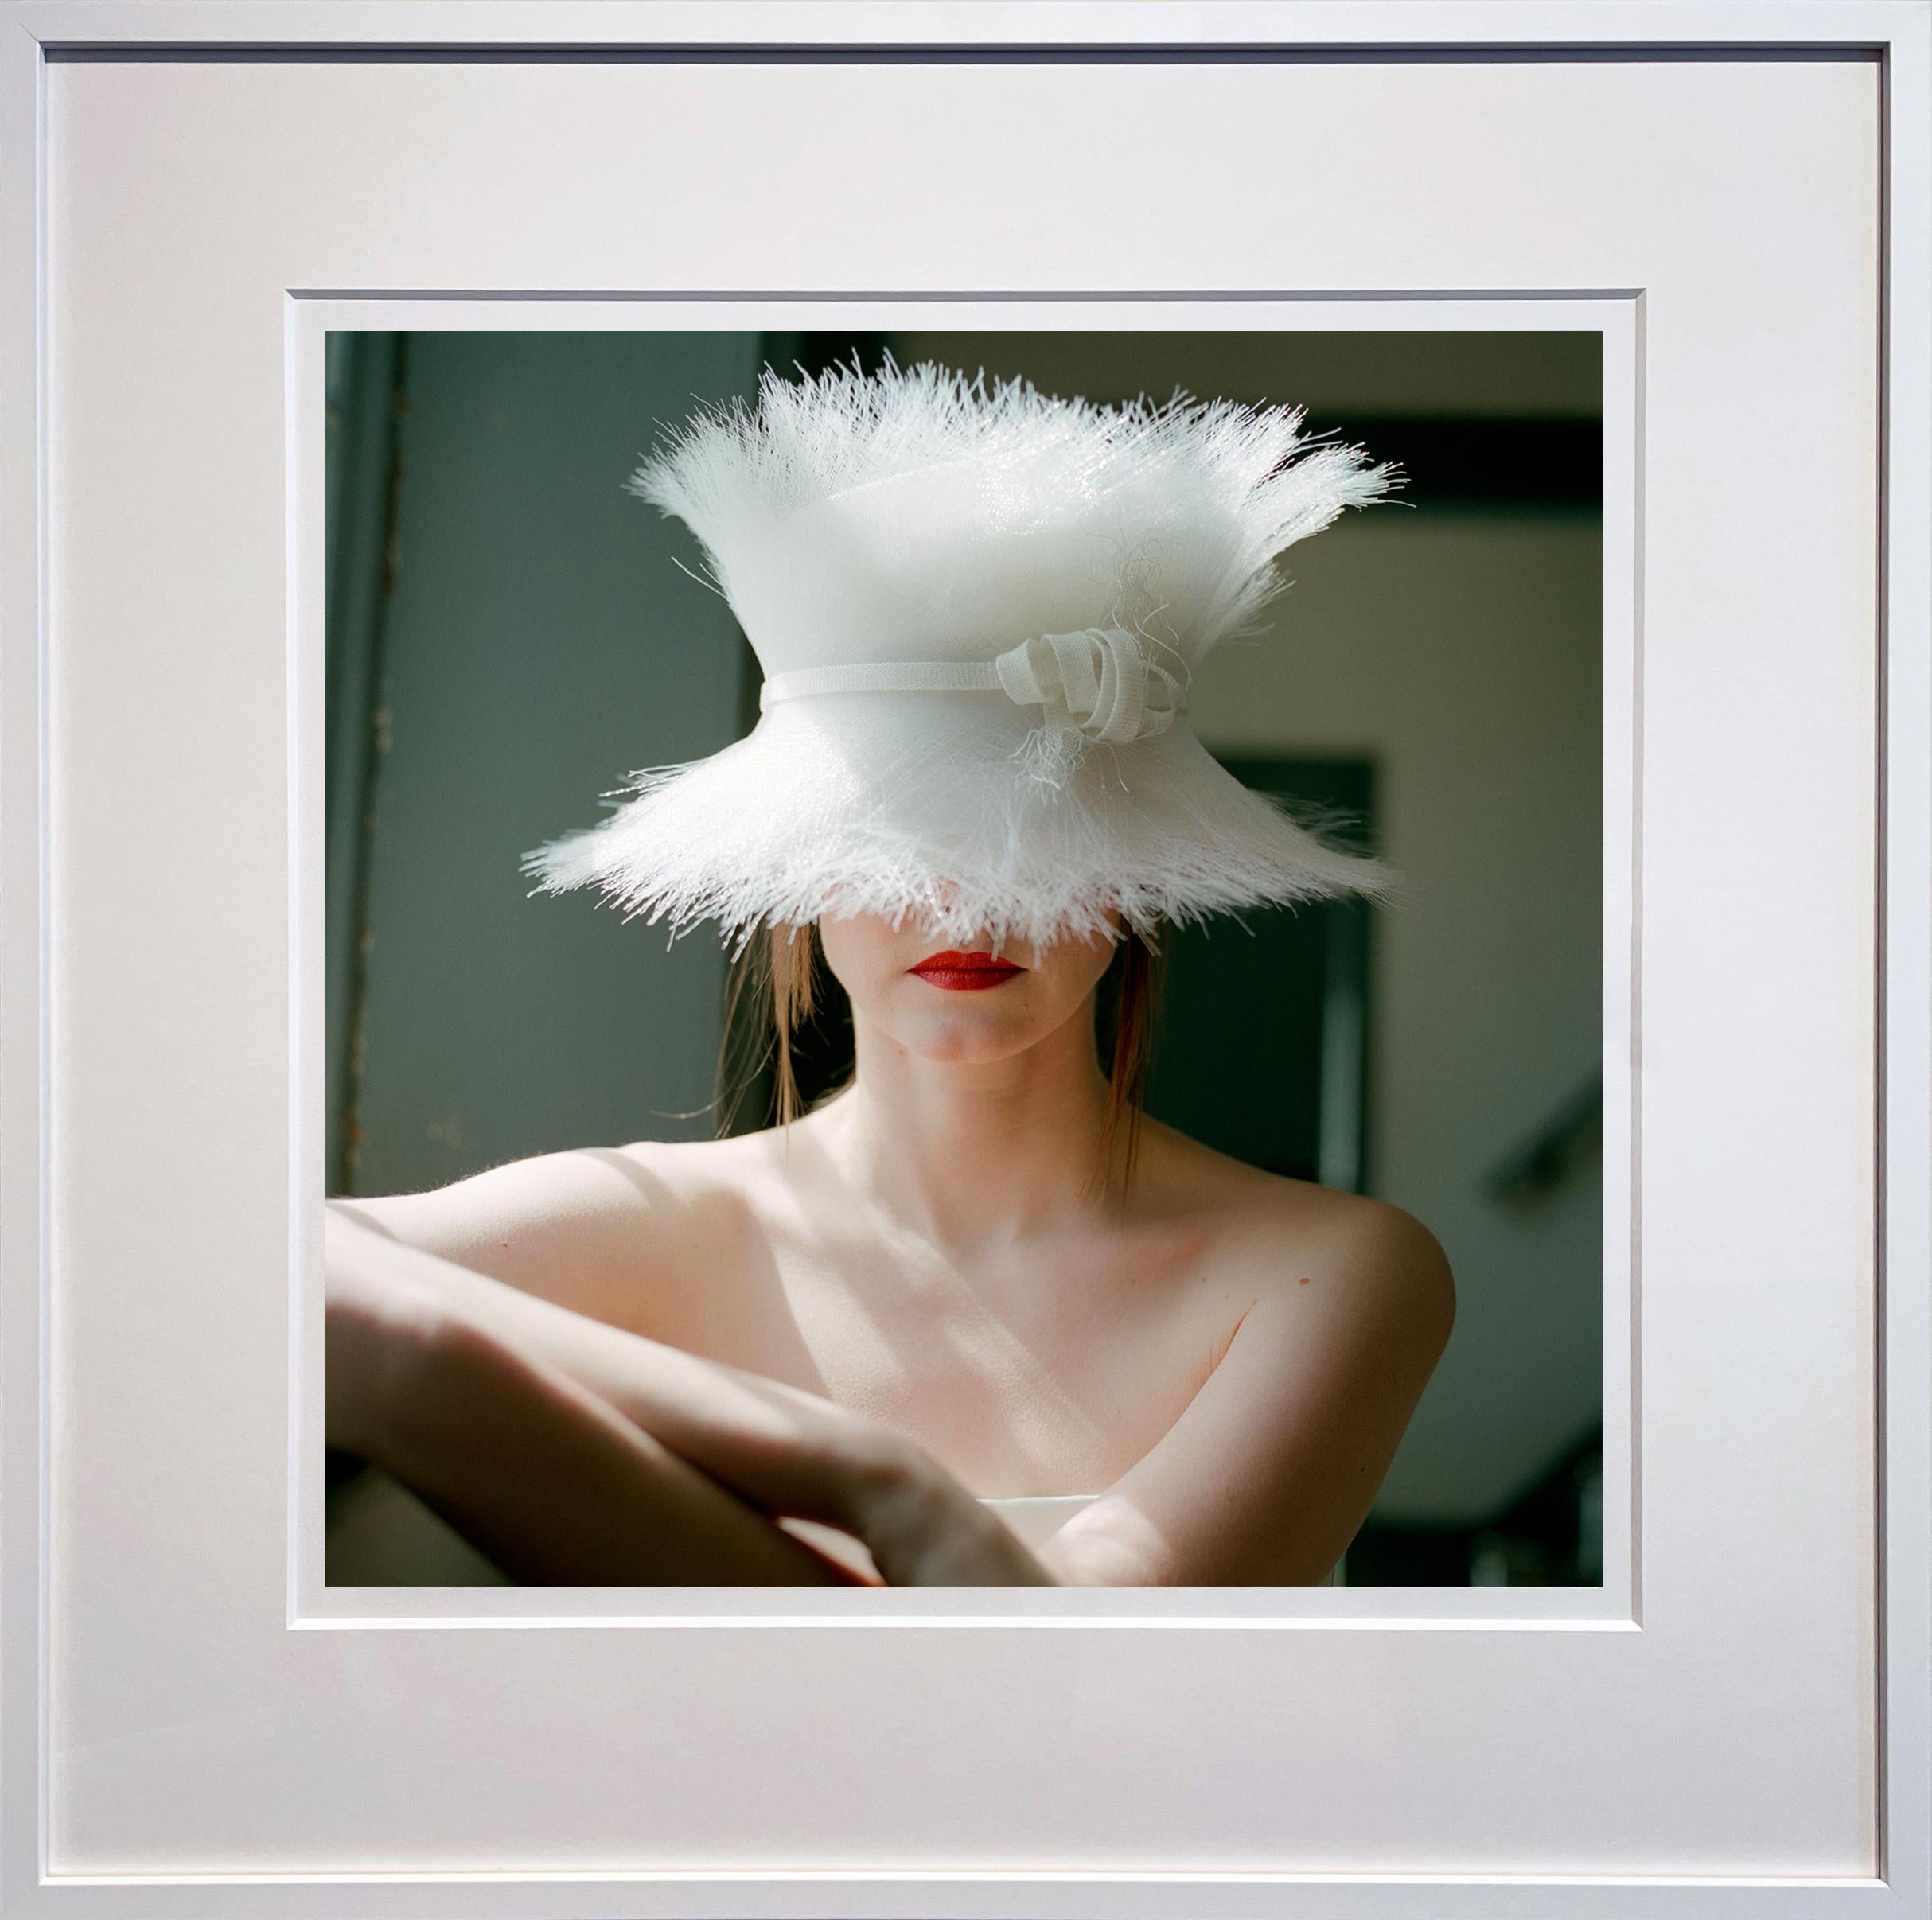 Woman in White Hat, Hancock Shaker Village, Massachusetts - 20 x 20 inches - Contemporary Photograph by Rodney Smith